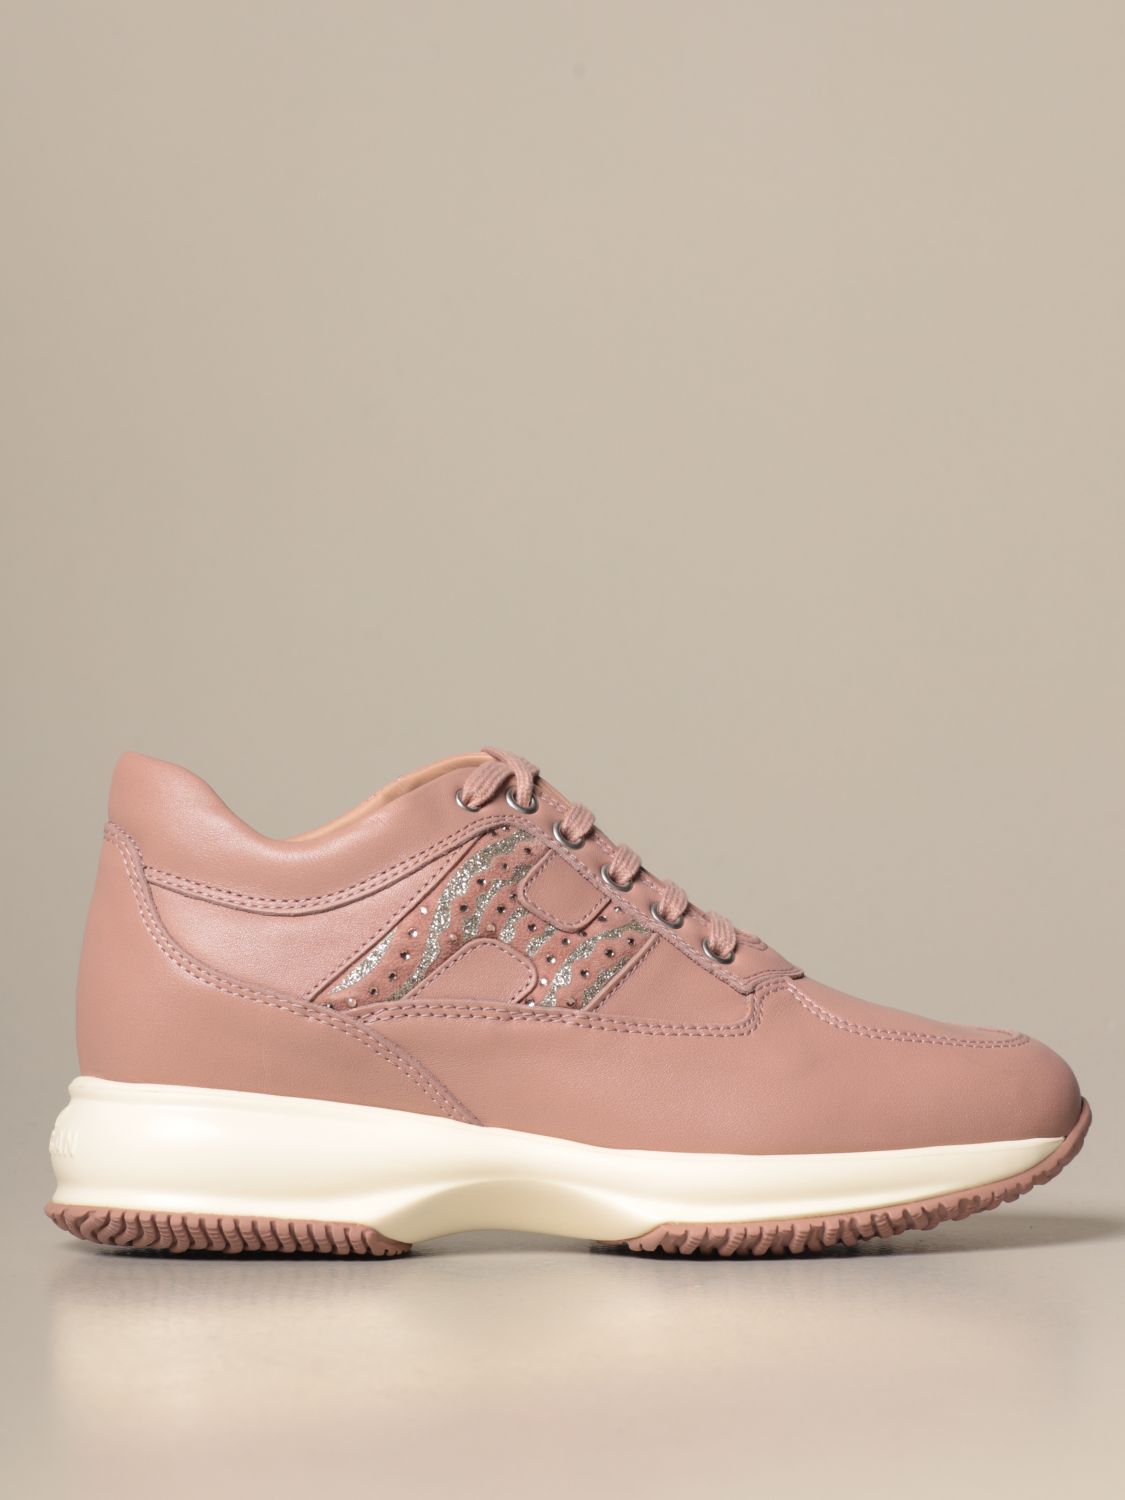 Nogen ubehag Foran Hogan Outlet: Interactive sneakers in leather with rhinestone glitter H |  Sneakers Hogan Women Pink | Sneakers Hogan HXW00N0DE30 OG7 GIGLIO.COM